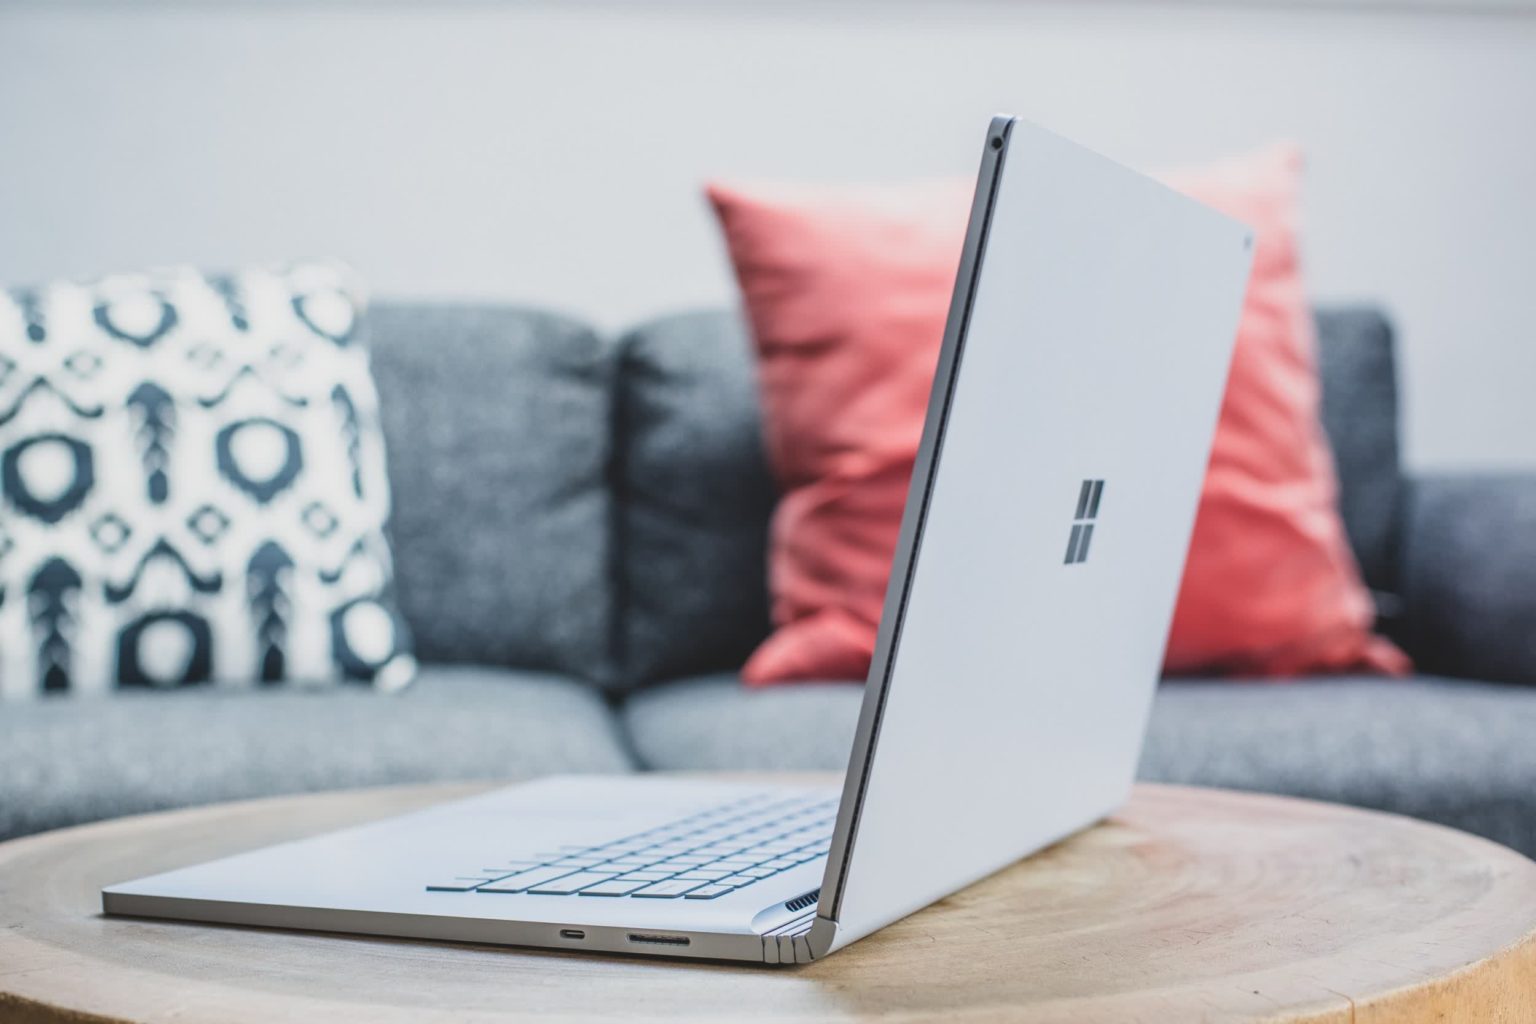 Microsoft is extending the support period for Surface devices